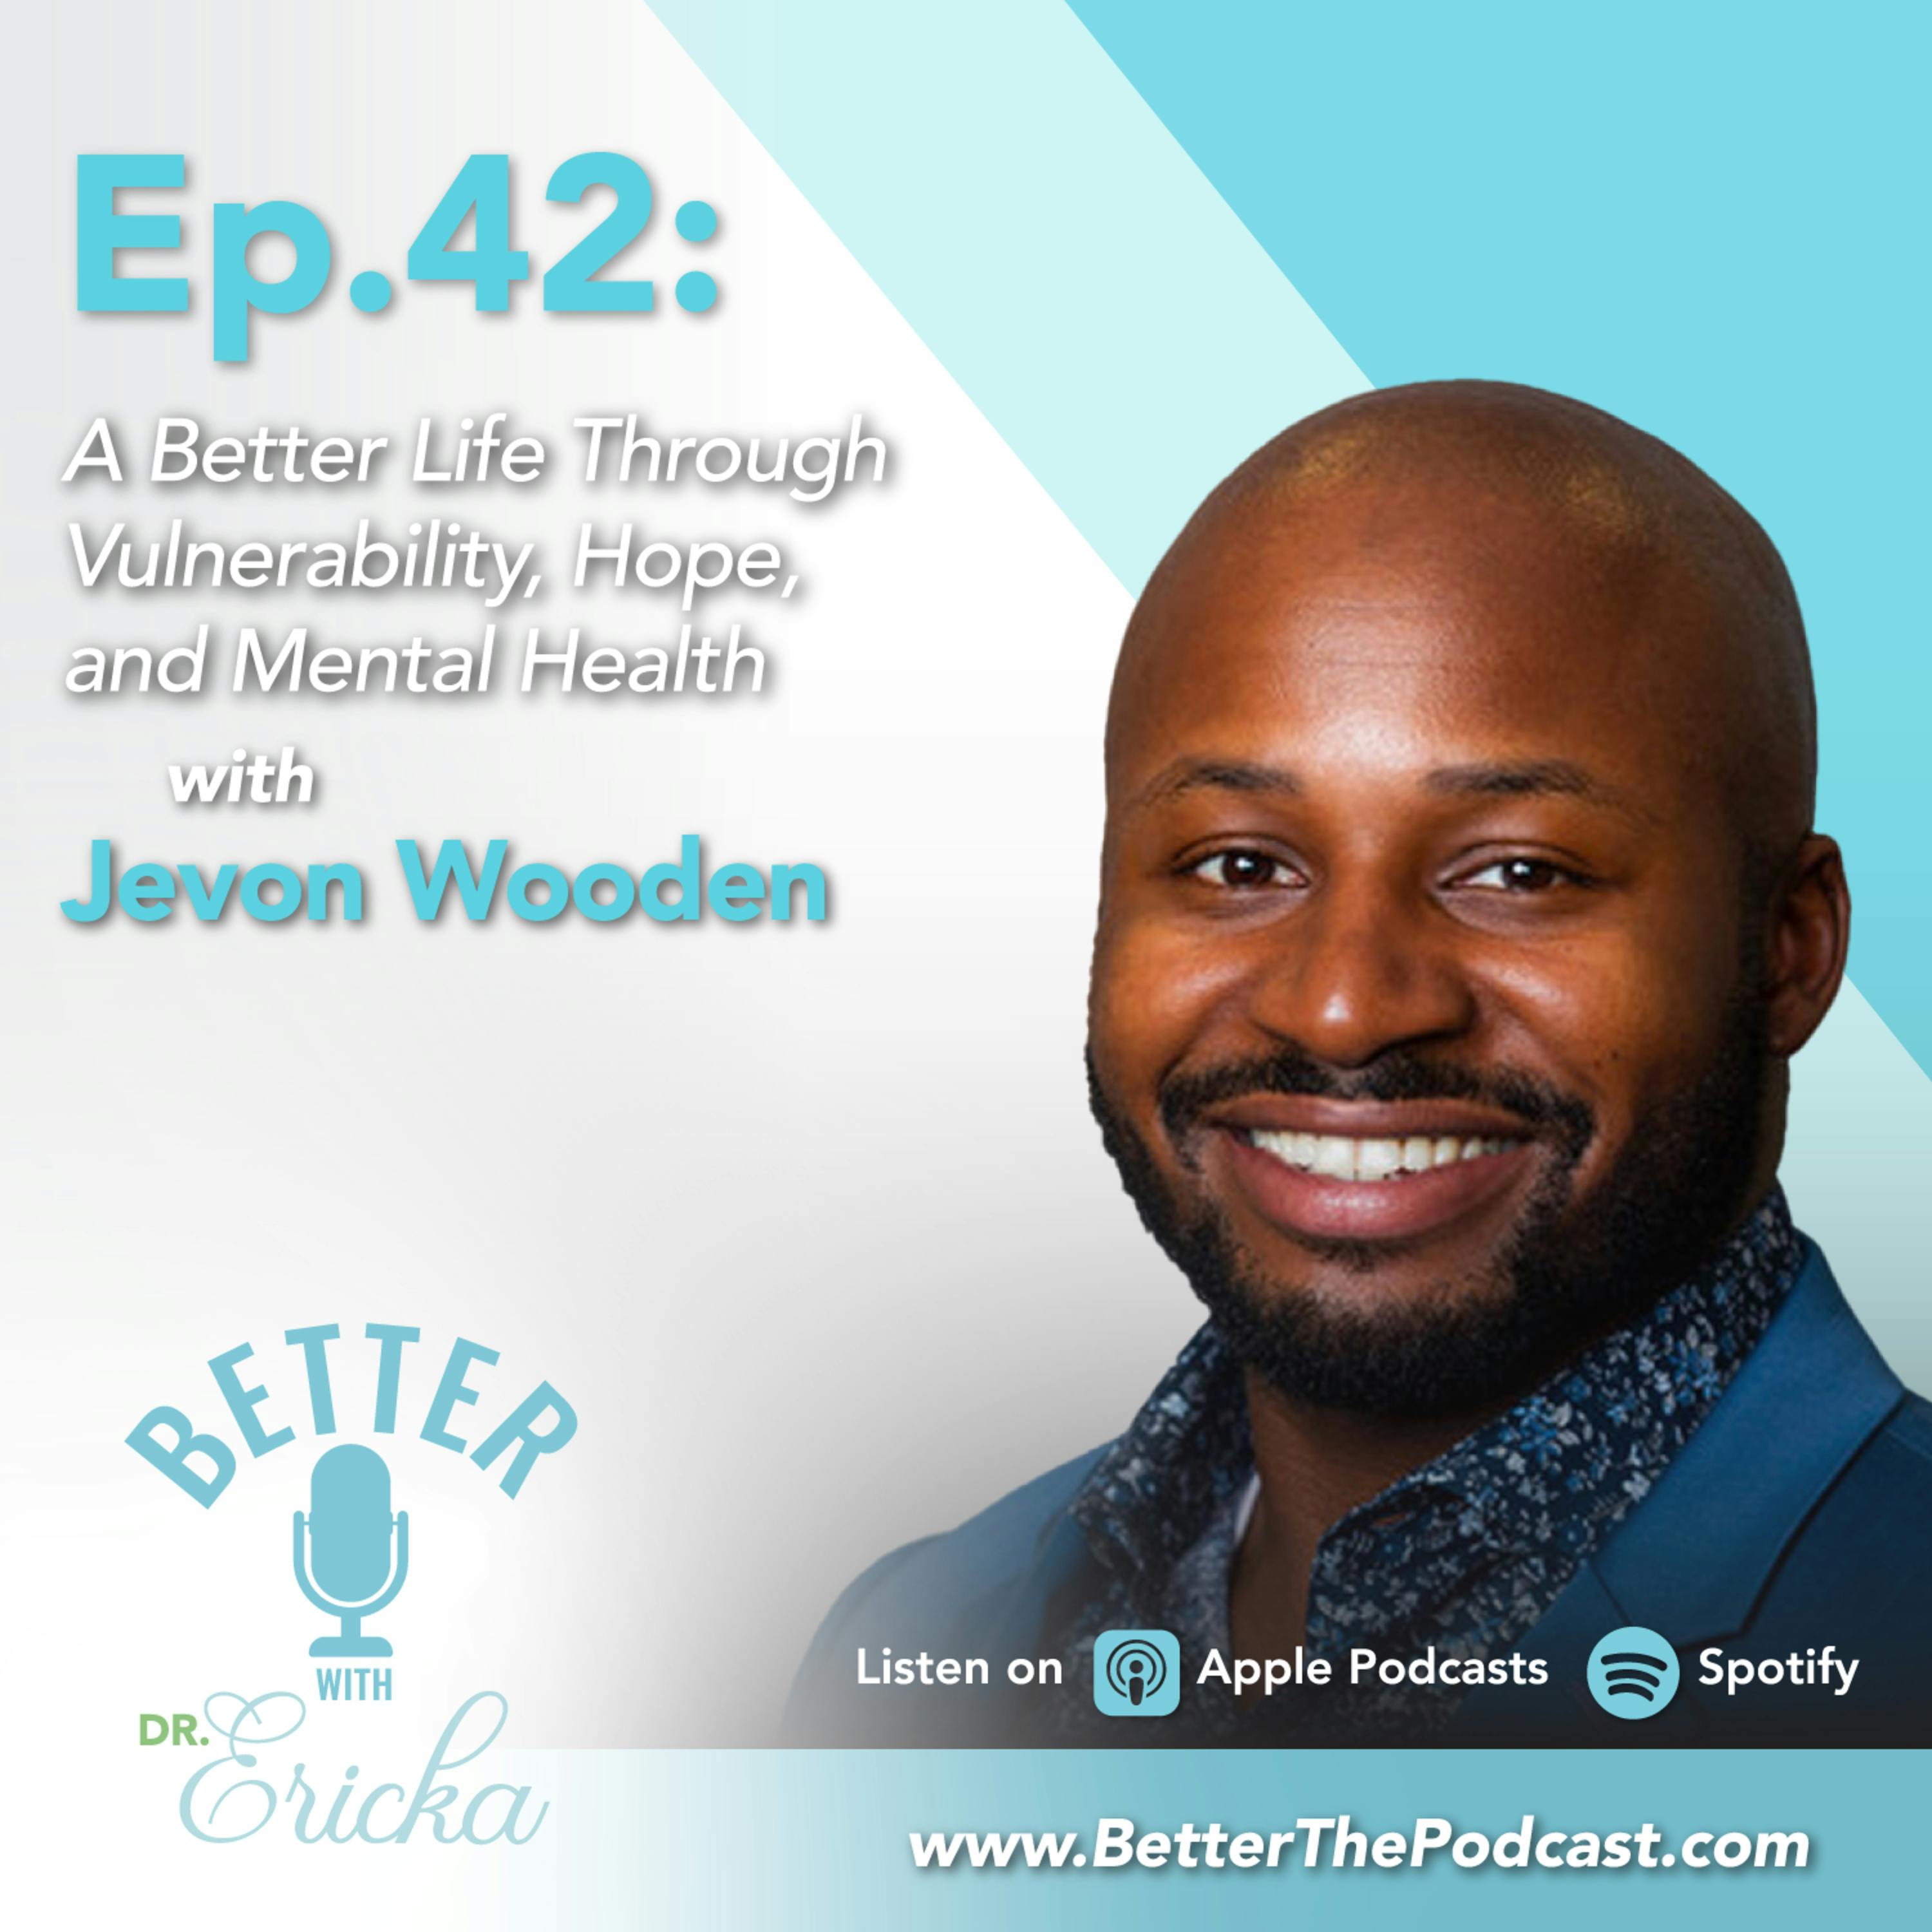 A Better Life Through Vulnerability, Hope, and Mental Health with Jevon Wooden